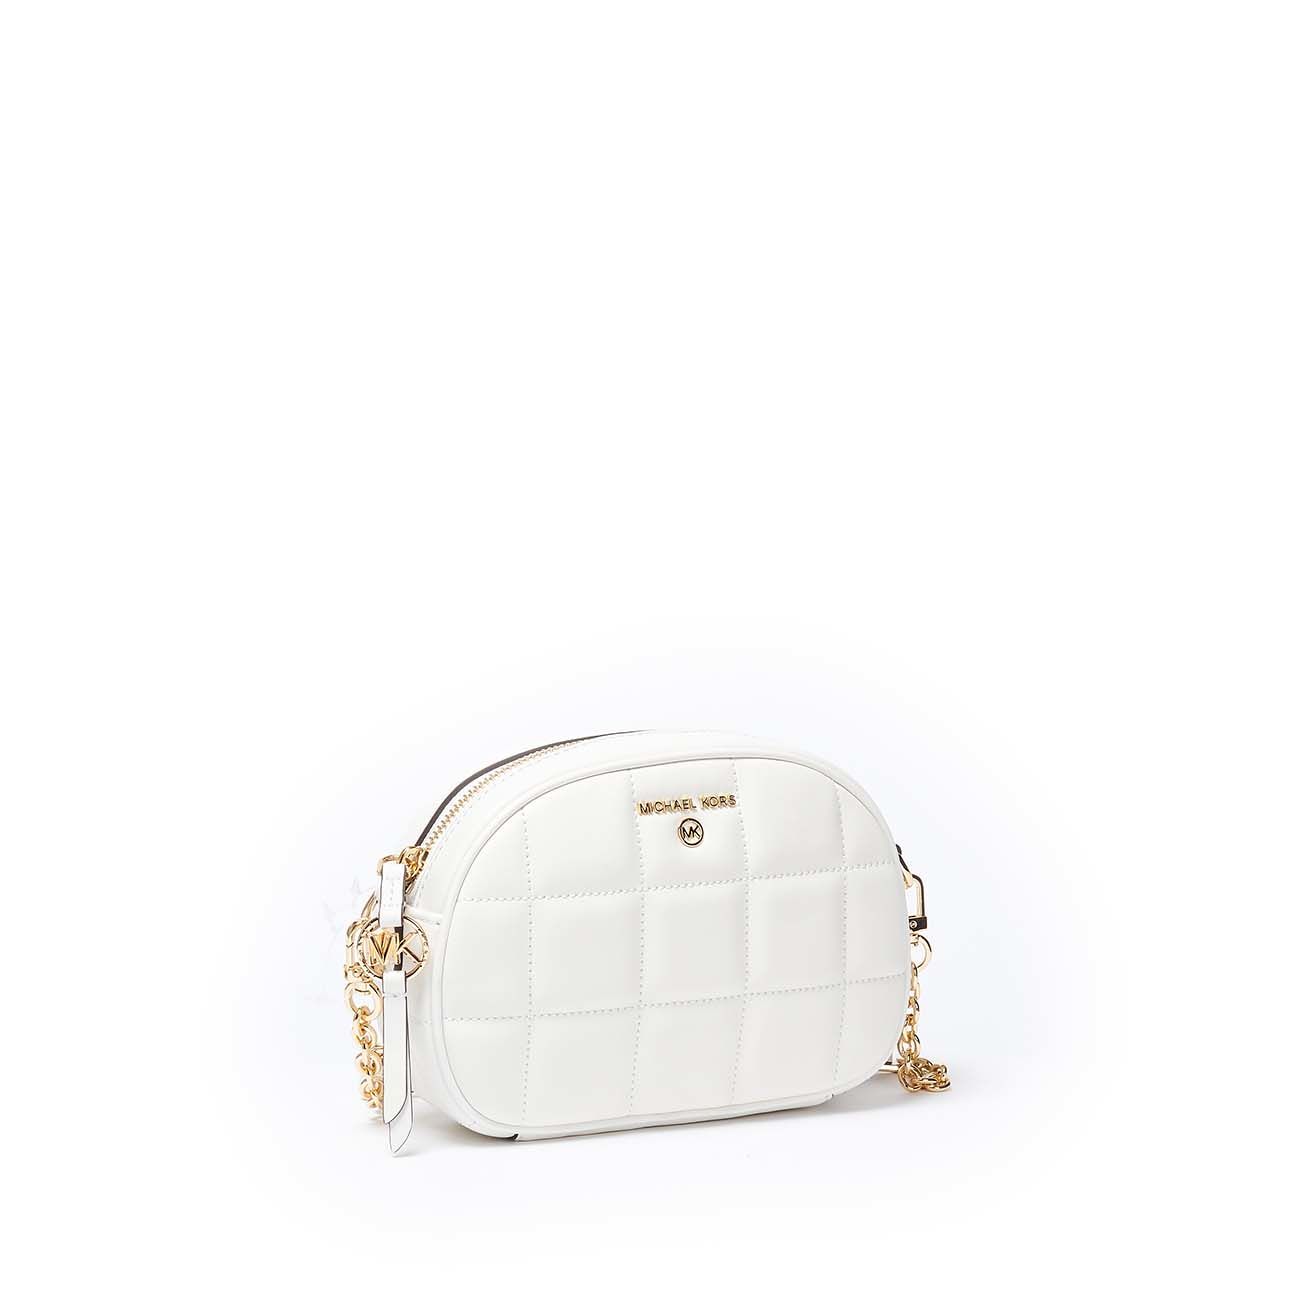 MICHAEL KORS: Michael Jet Set bag in quilted leather - Pink